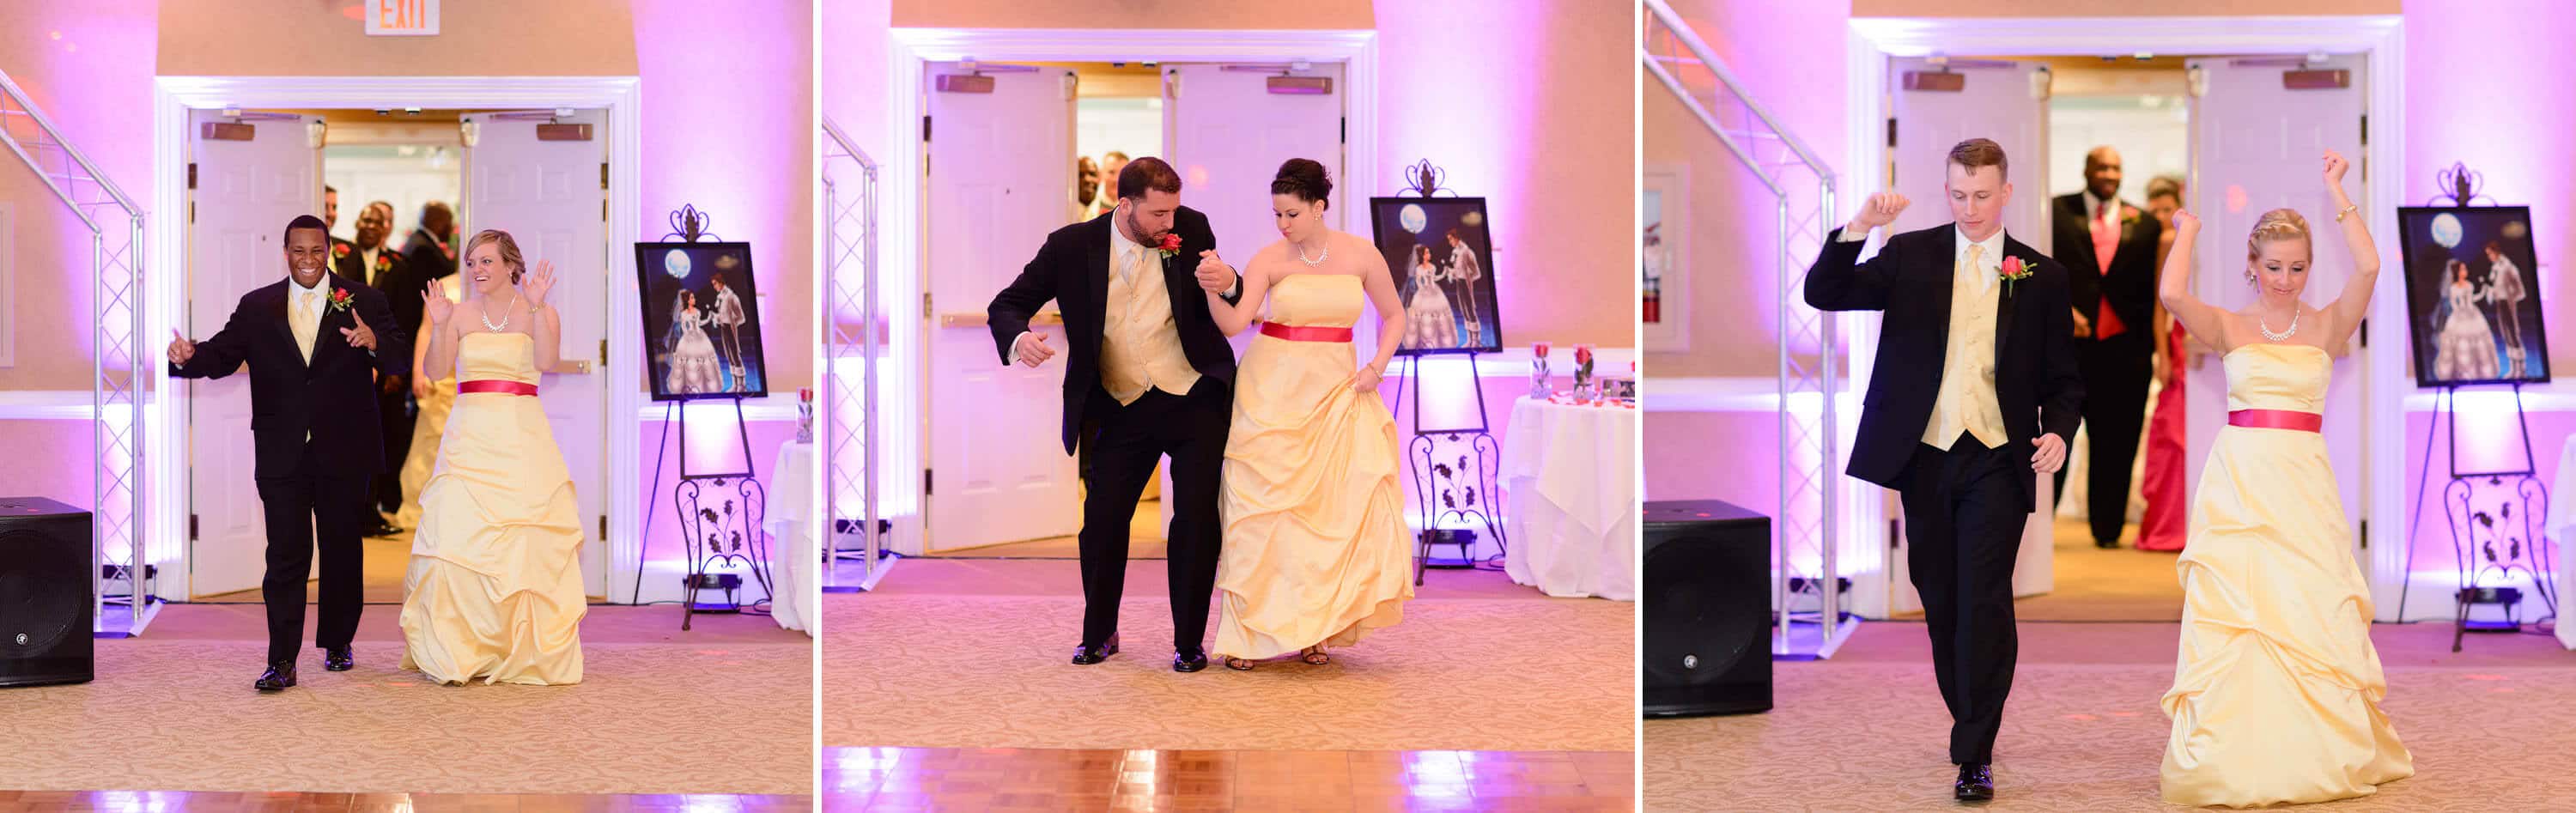 Pawleys Plantation wedding with a Beauty and the Beast theme reception